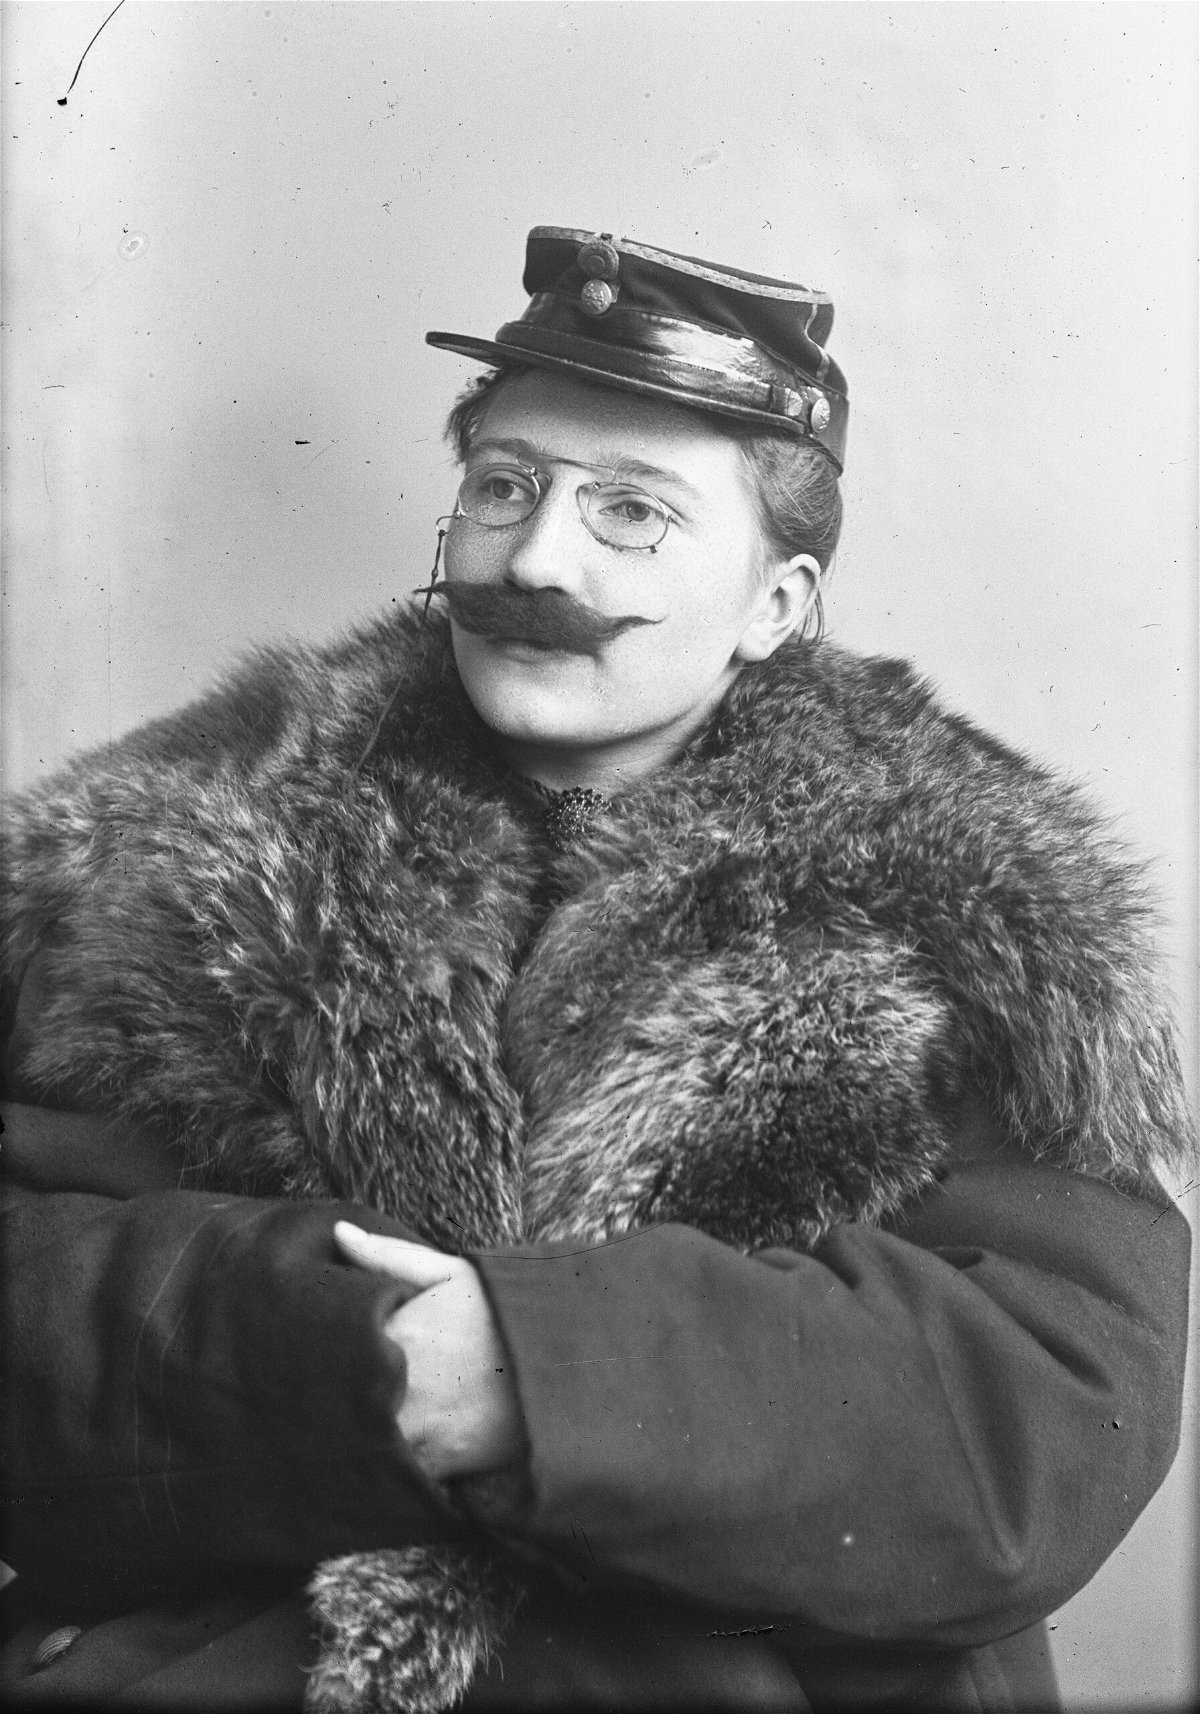 <i>Preus Museum--Norwegian Museum of Photography</i><br/>Bolette Berg pictured with a handlebar mustache. Little is known about Berg